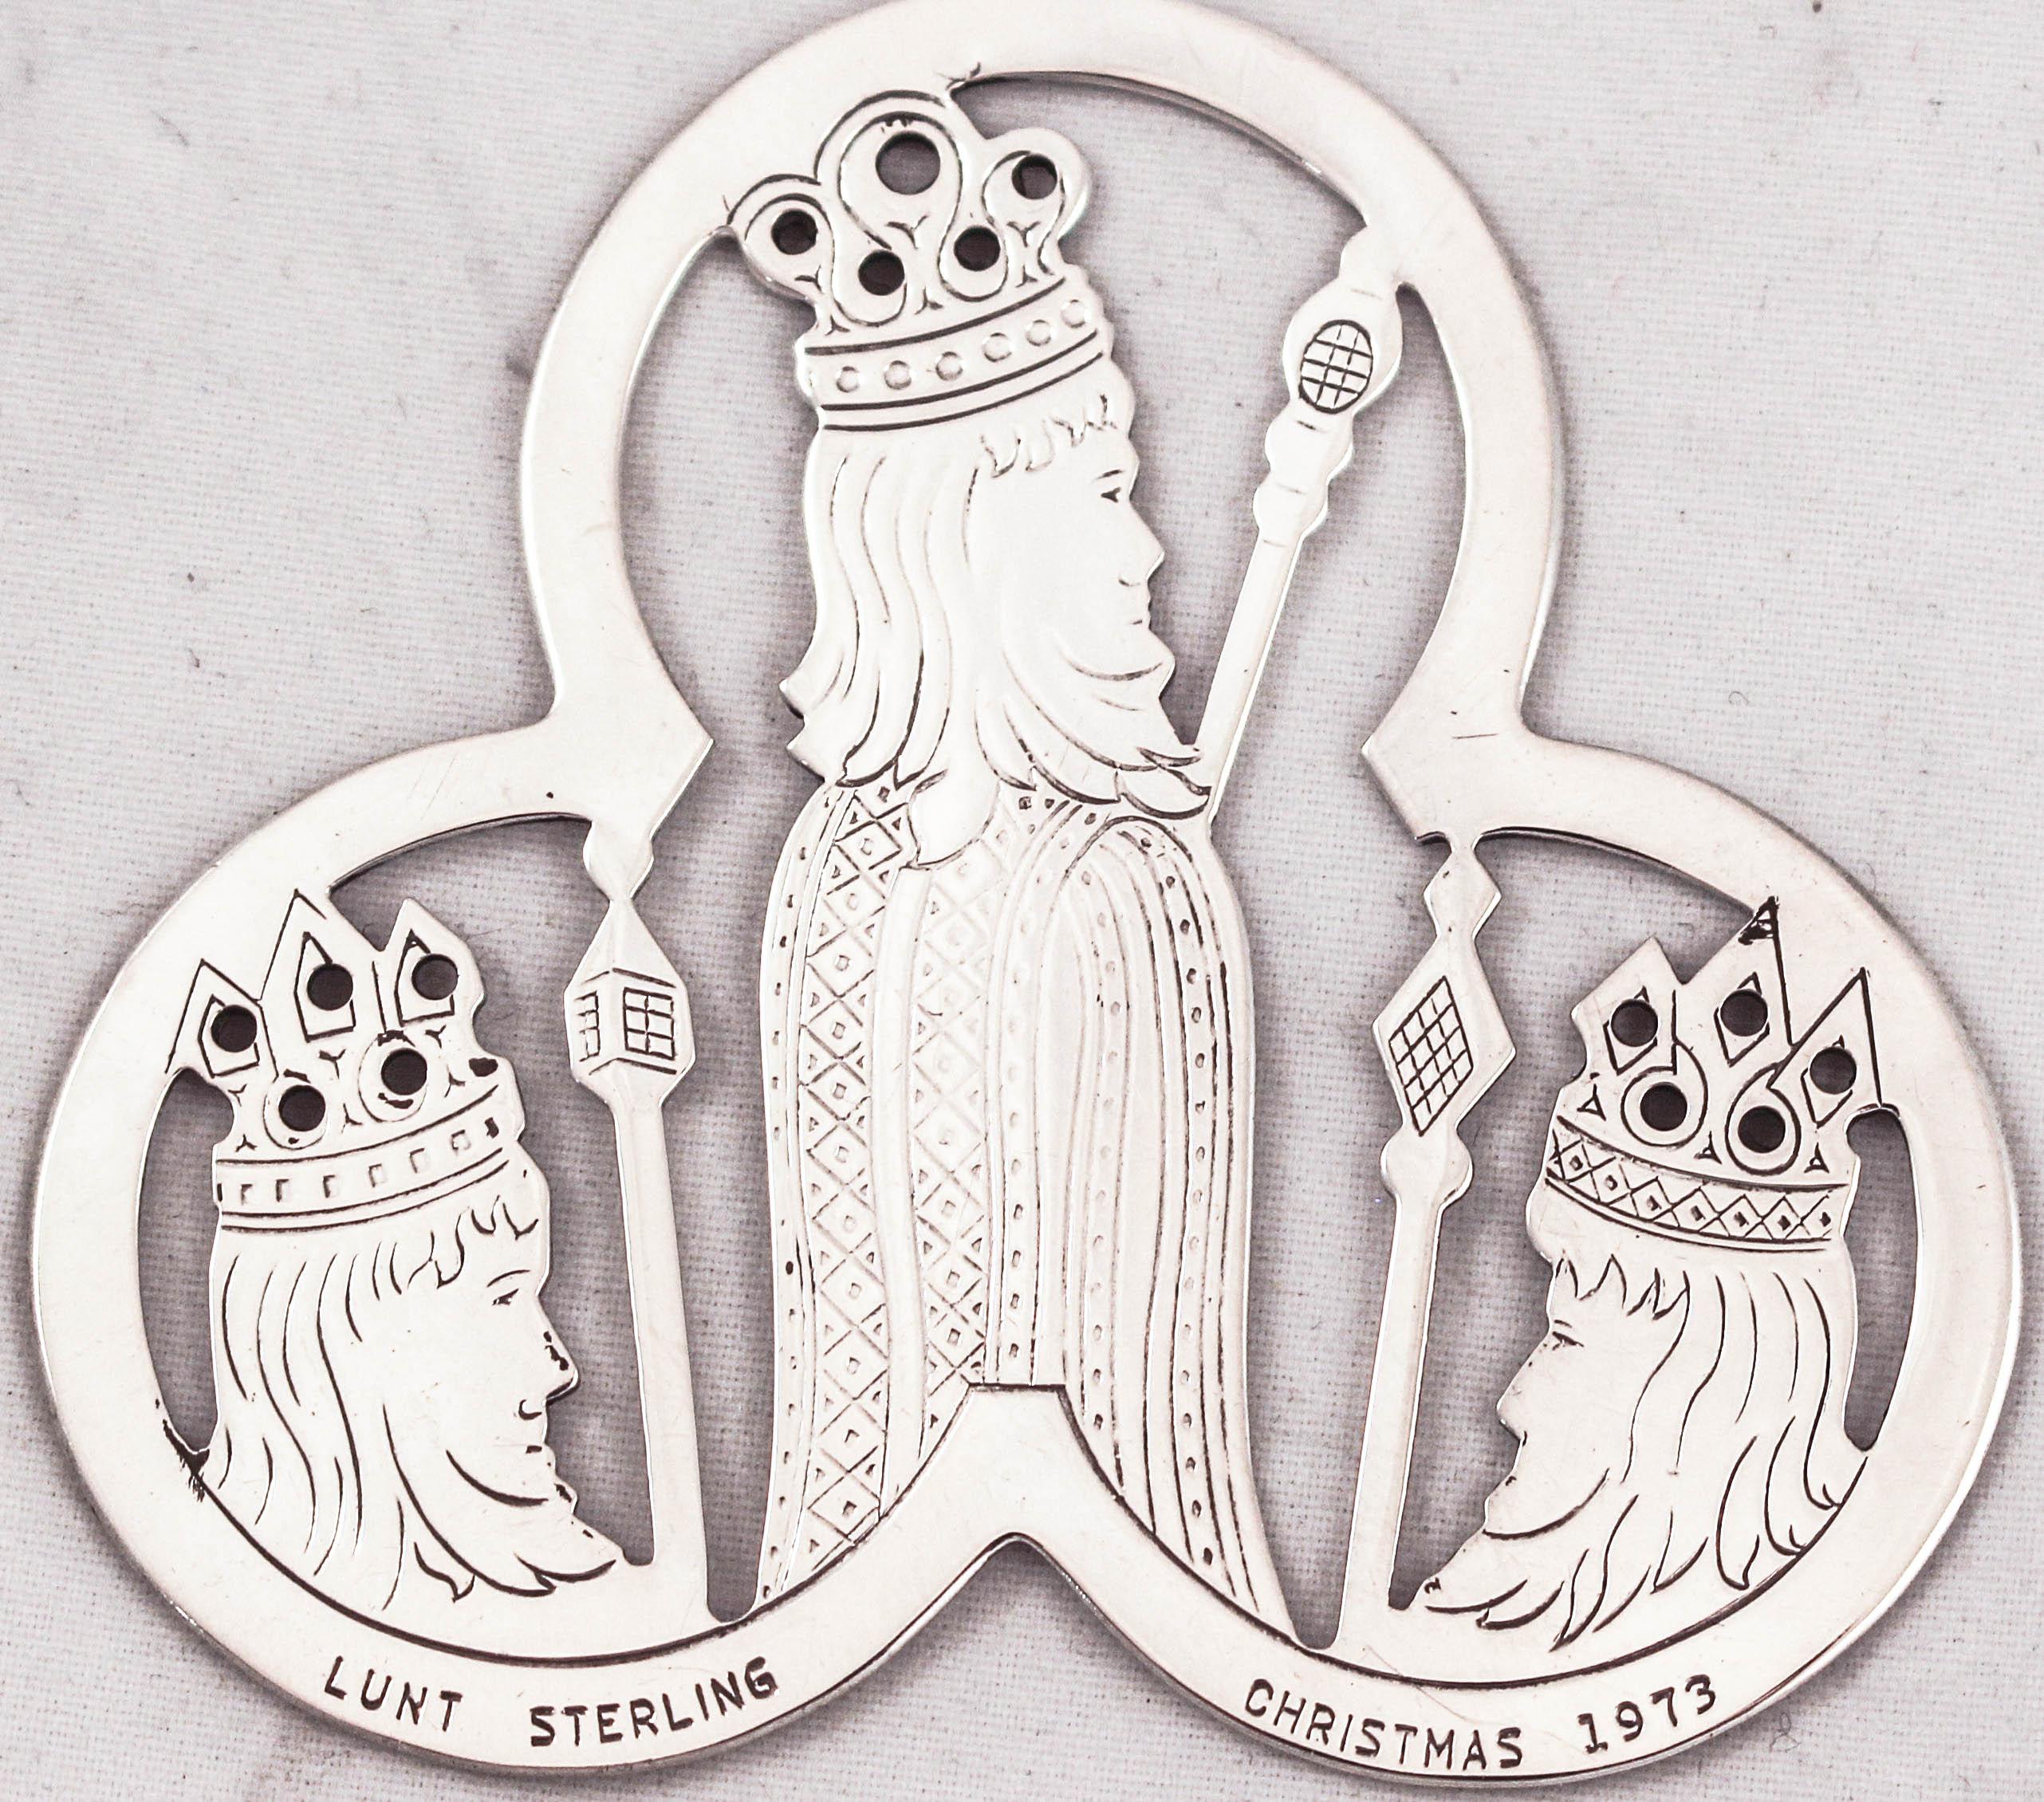 We are delighted to offer this sterling silver Christmas ornament depicting the “Three Wise Men” or “Three Kings” in search of the baby Jesus. Very rare and in mint condition. Each King is seen caring a staff and wears a crown in honor of the